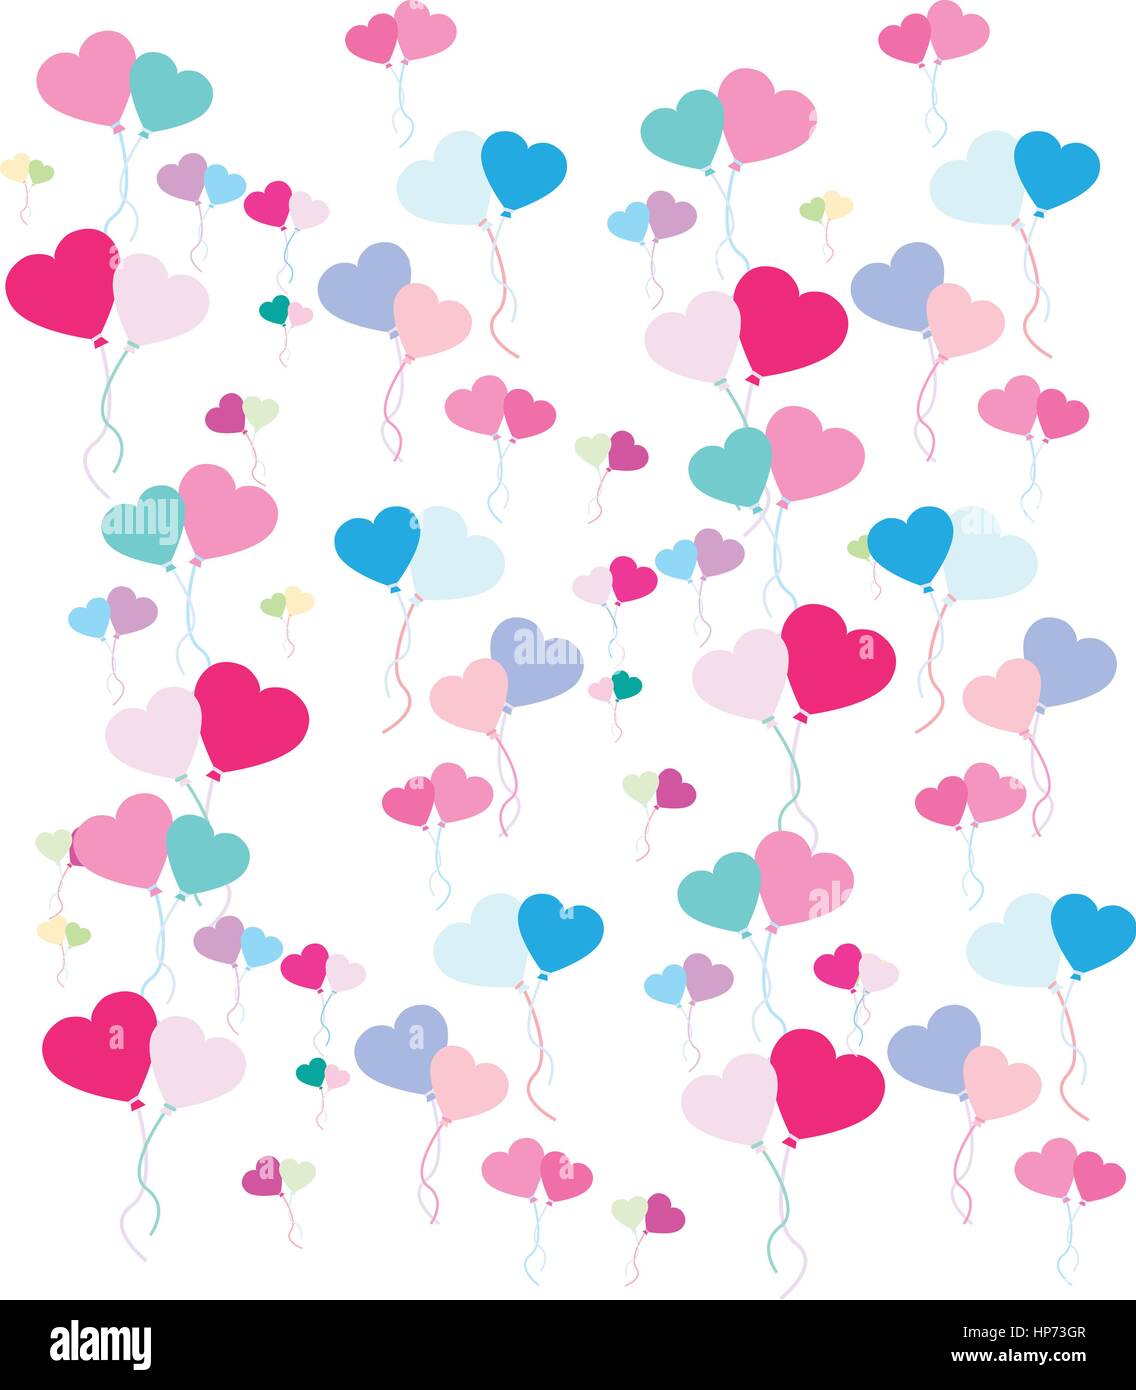 vector image of a repeat pattern of heart balloons on white background Stock Vector